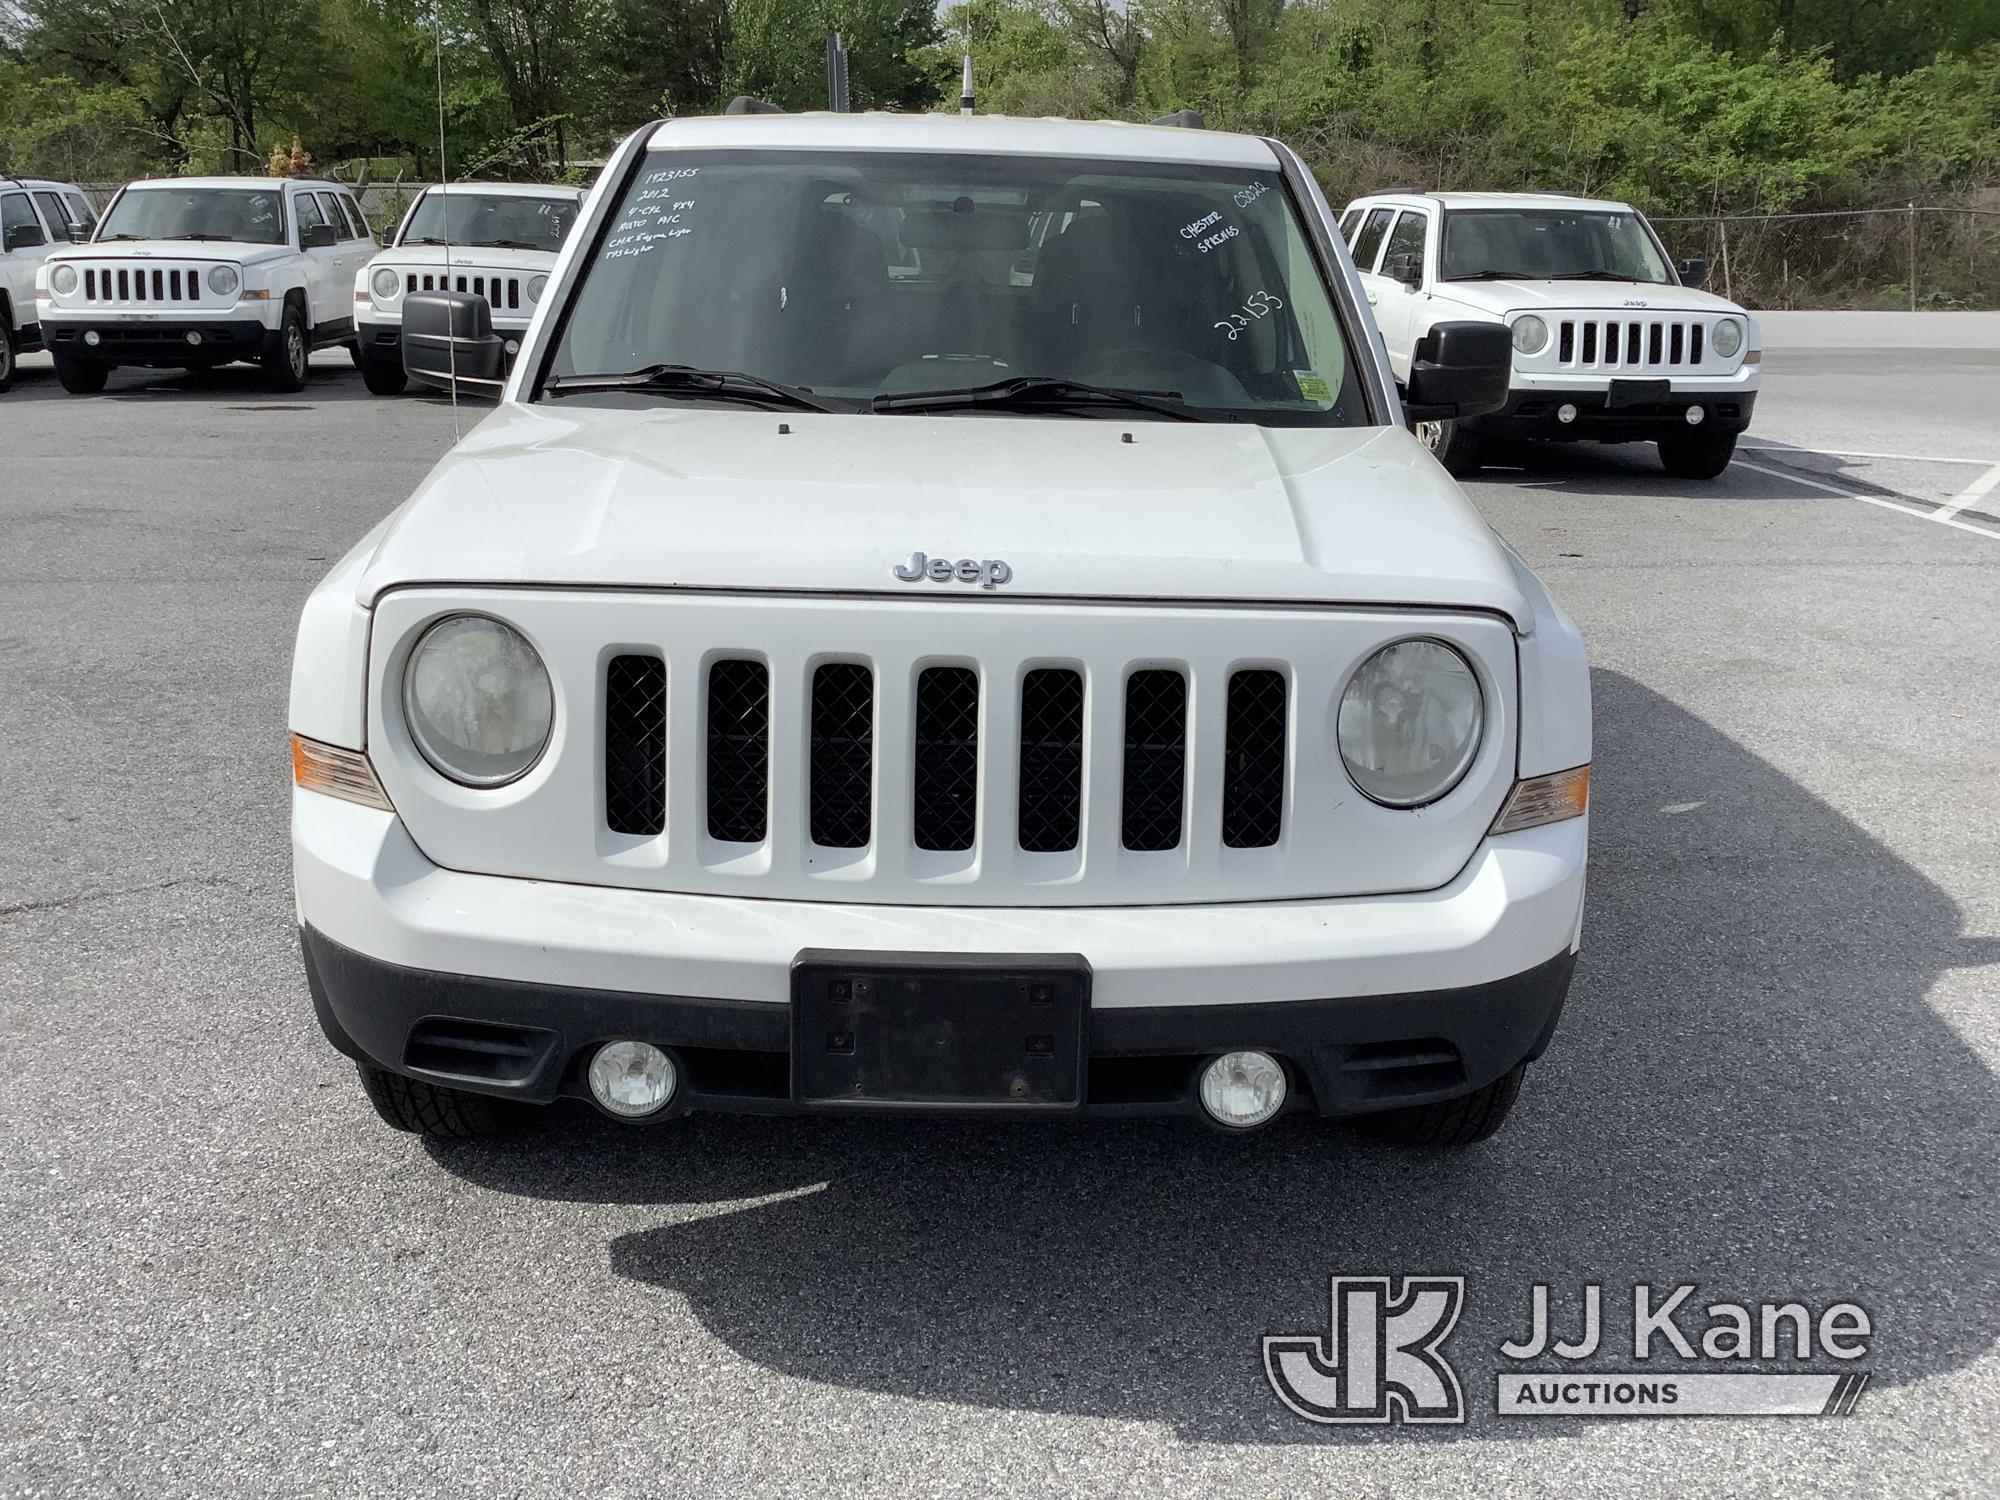 (Chester Springs, PA) 2012 Jeep Patriot 4x4 4-Door Sport Utility Vehicle Runs & Moves, Engine Light